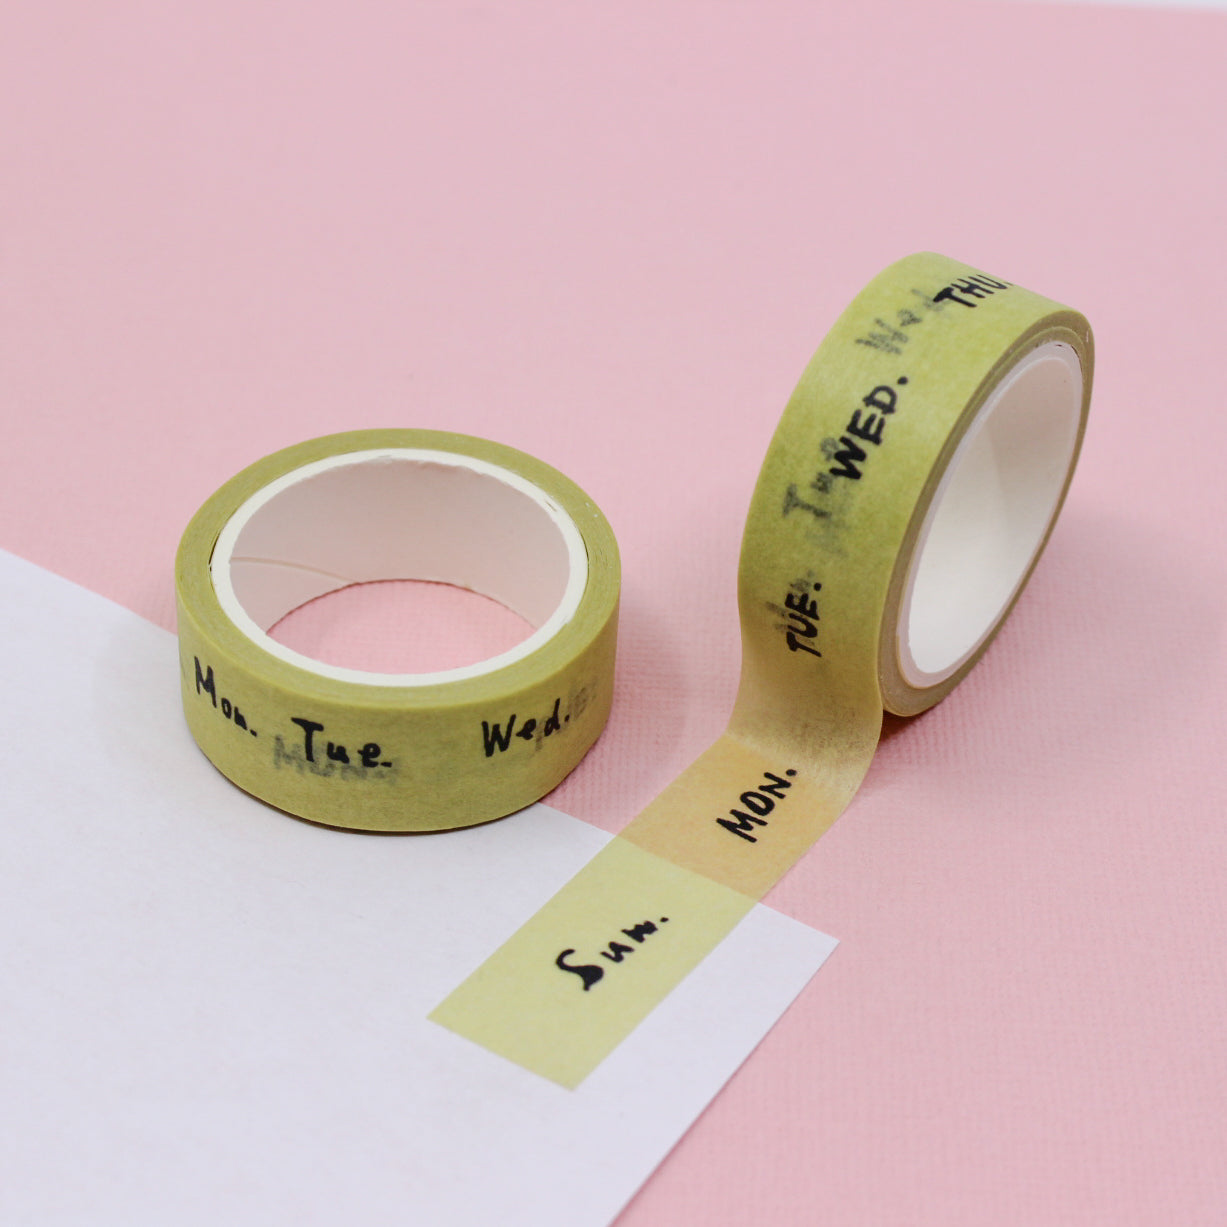 A vibrant Yellow Days of the Week Washi Tape featuring abbreviations for each day of the week. The tape adds a playful and organized touch to scheduling and planning, providing a pop of cheerful color to your planner or calendar. This tape is sold exclusively at BBB Supplies Craft Shop.